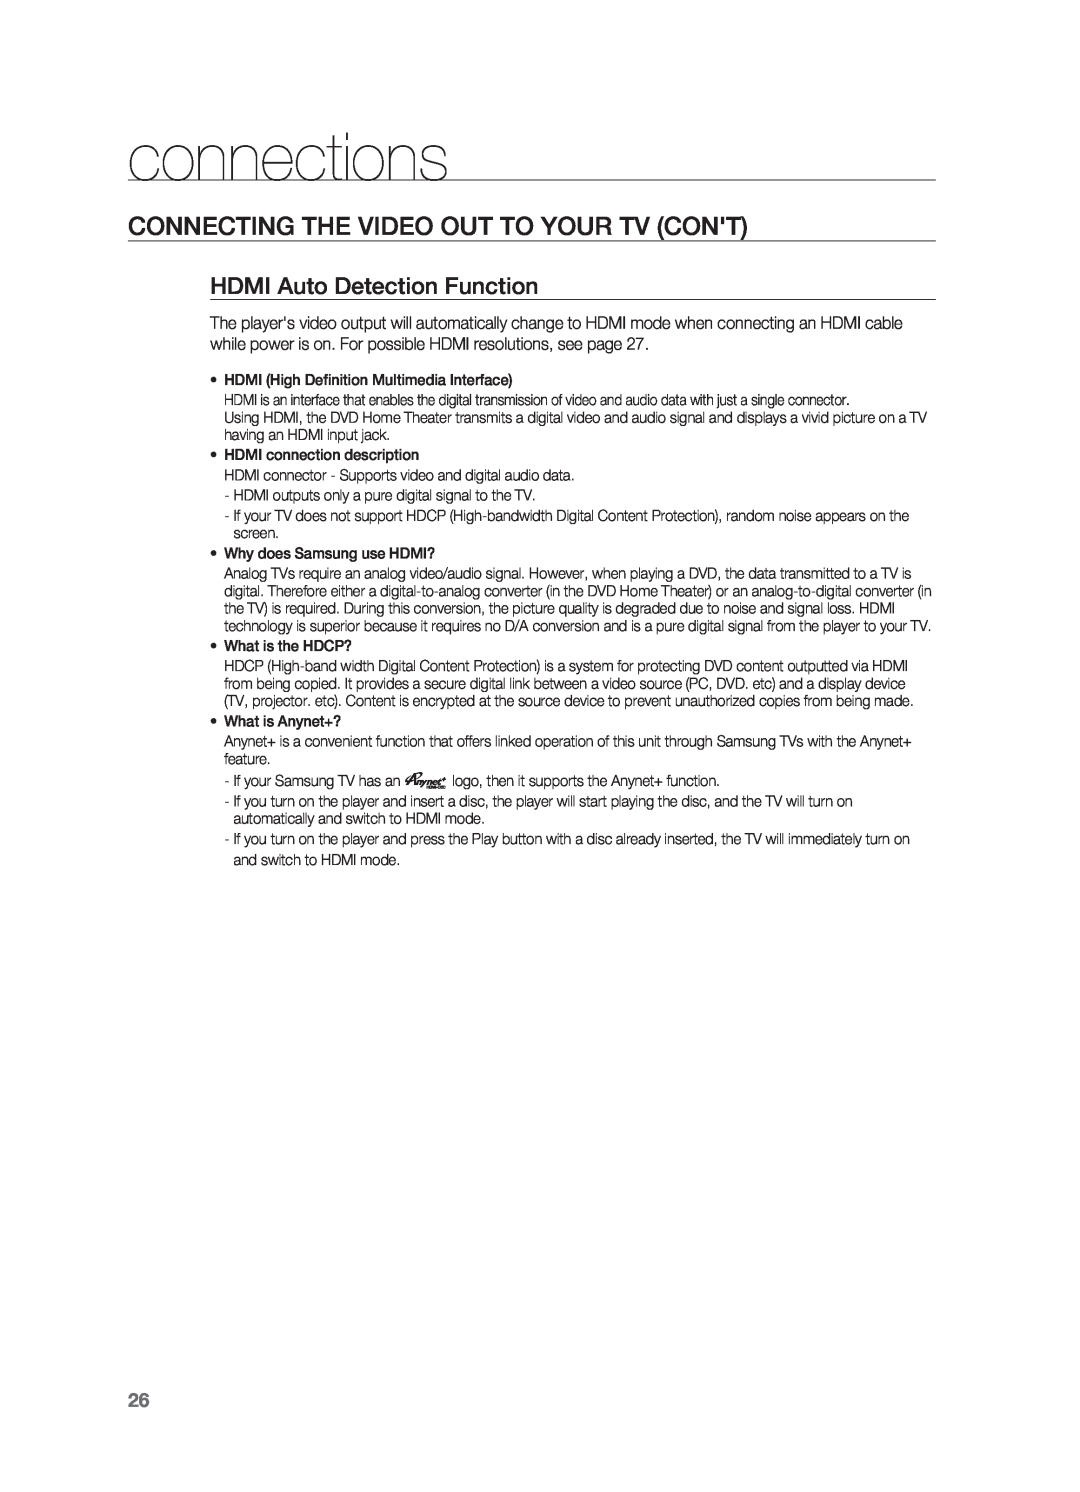 Samsung HT-TZ312 manual Connecting the Video Out to your TV CONt, HDMI Auto Detection Function, connections 